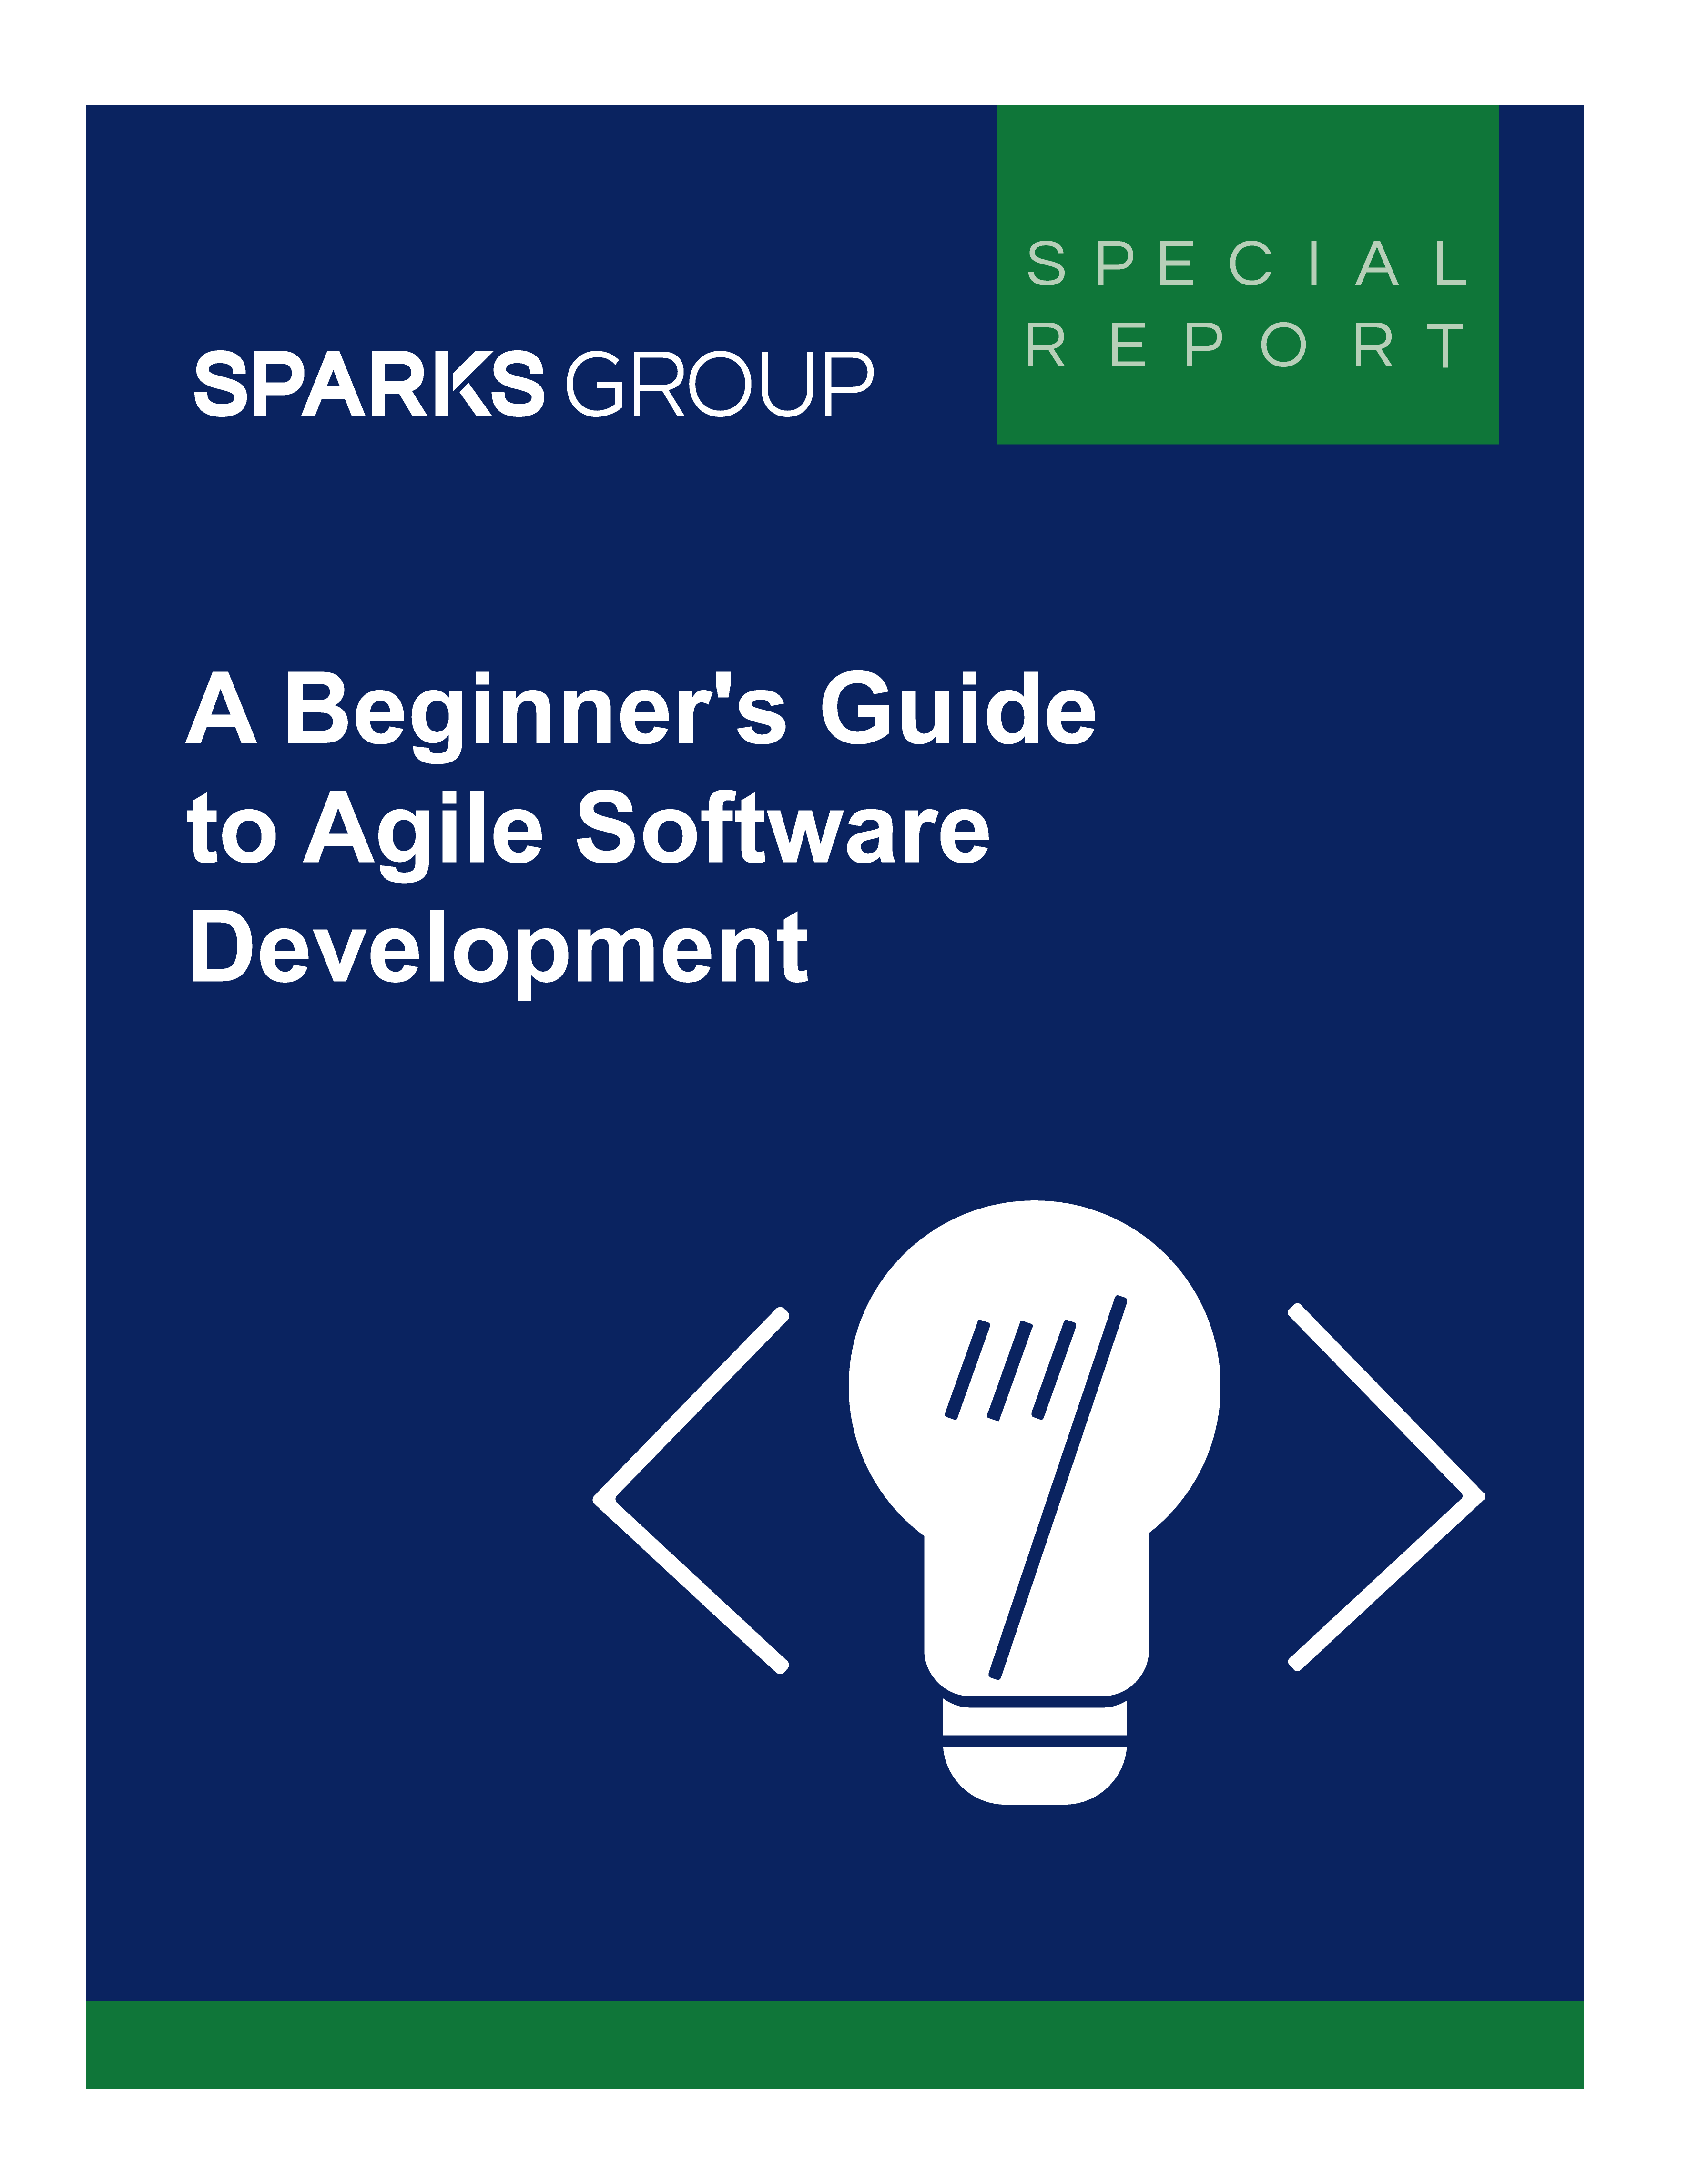 A Beginner's Guide to Agile Software Development